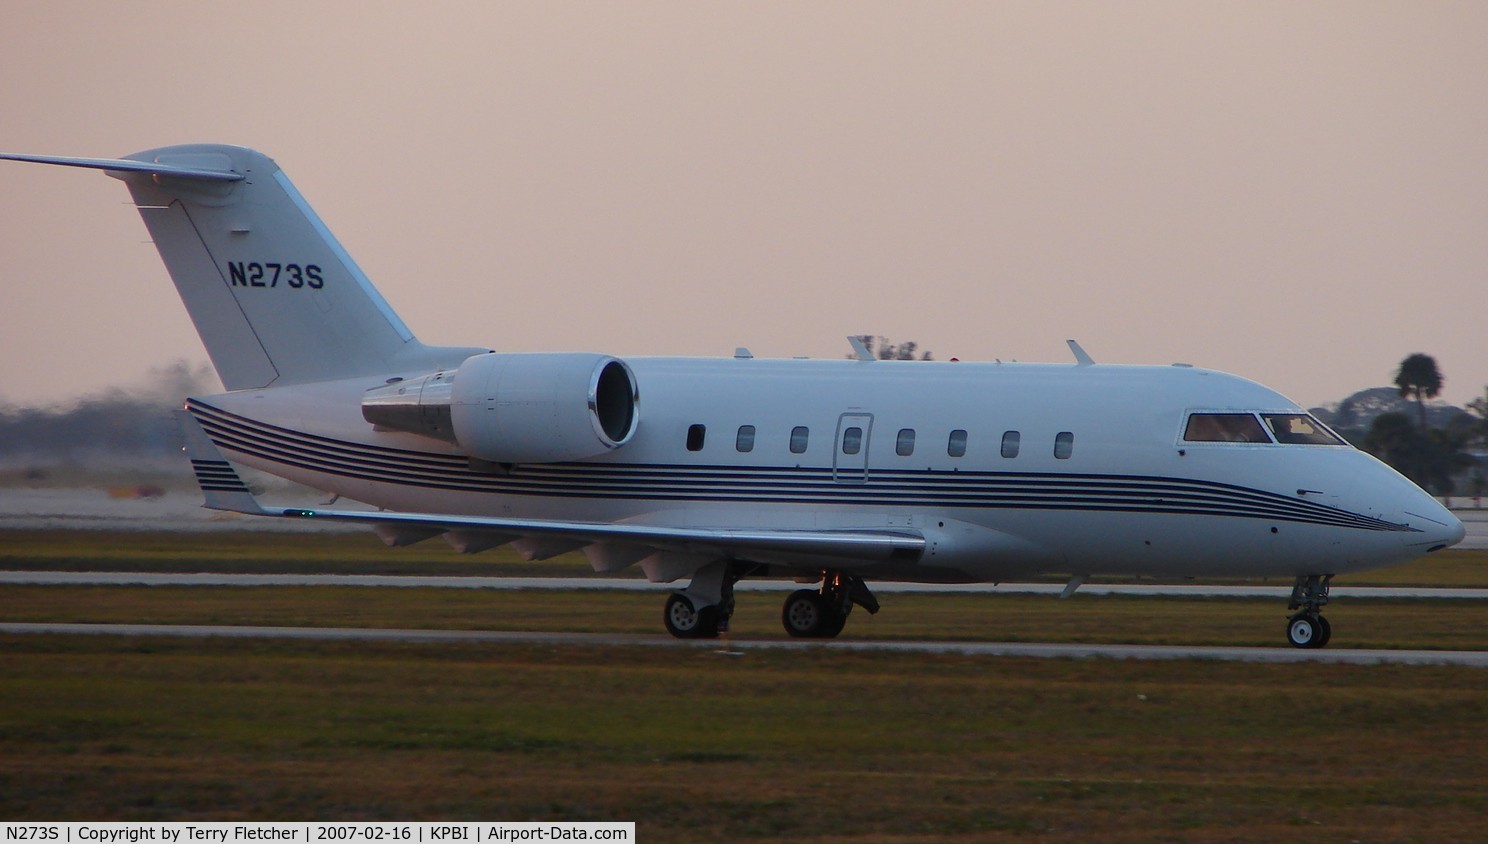 N273S, 1998 Bombardier Challenger 604 (CL-600-2B16) C/N 5396, part of the Friday afternoon arrivals 'rush' at PBI